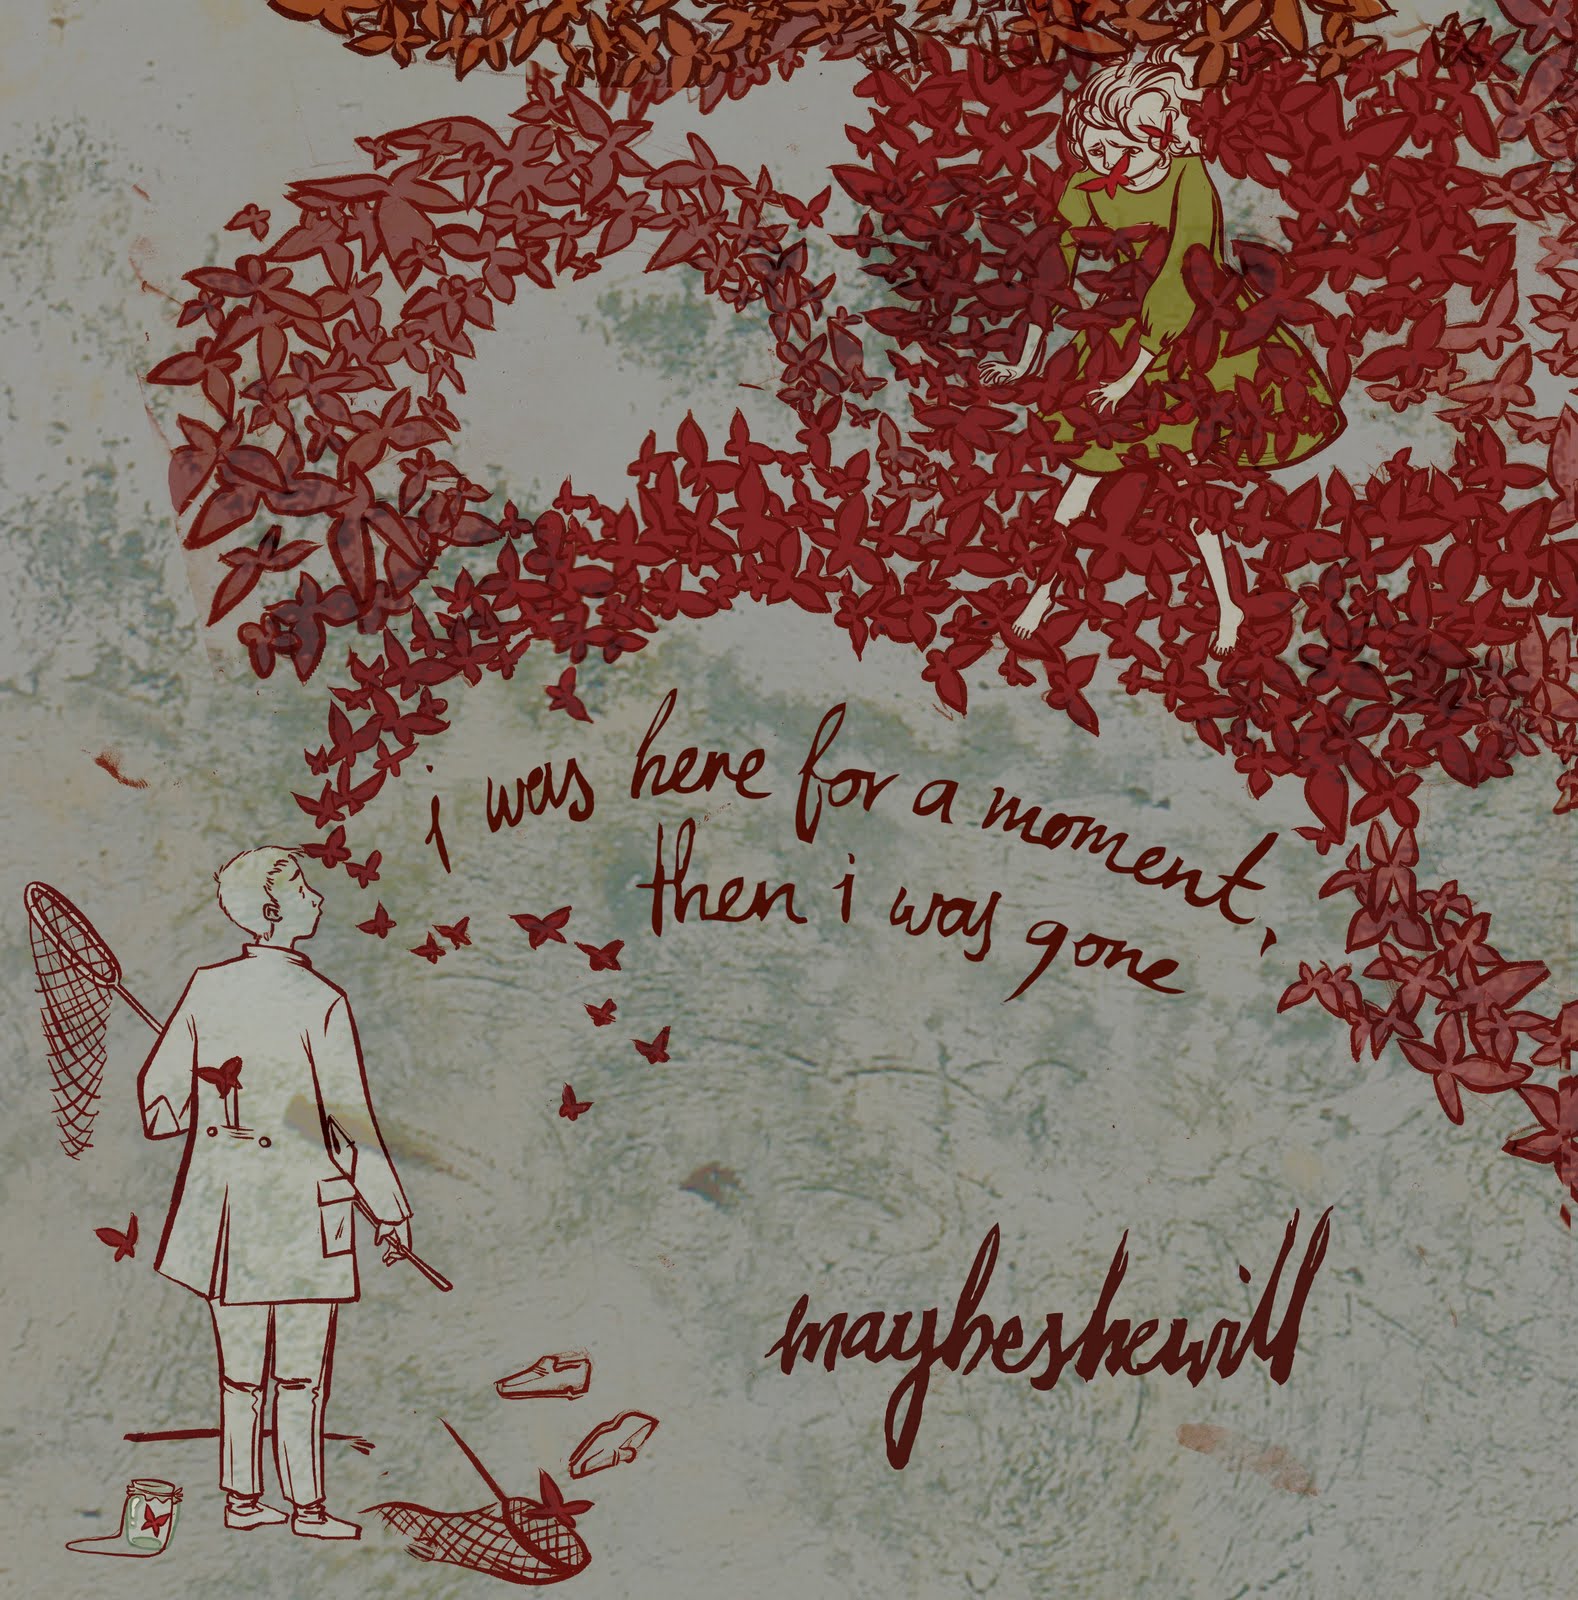 Maybeshewill — I was here for a moment, then I was gone